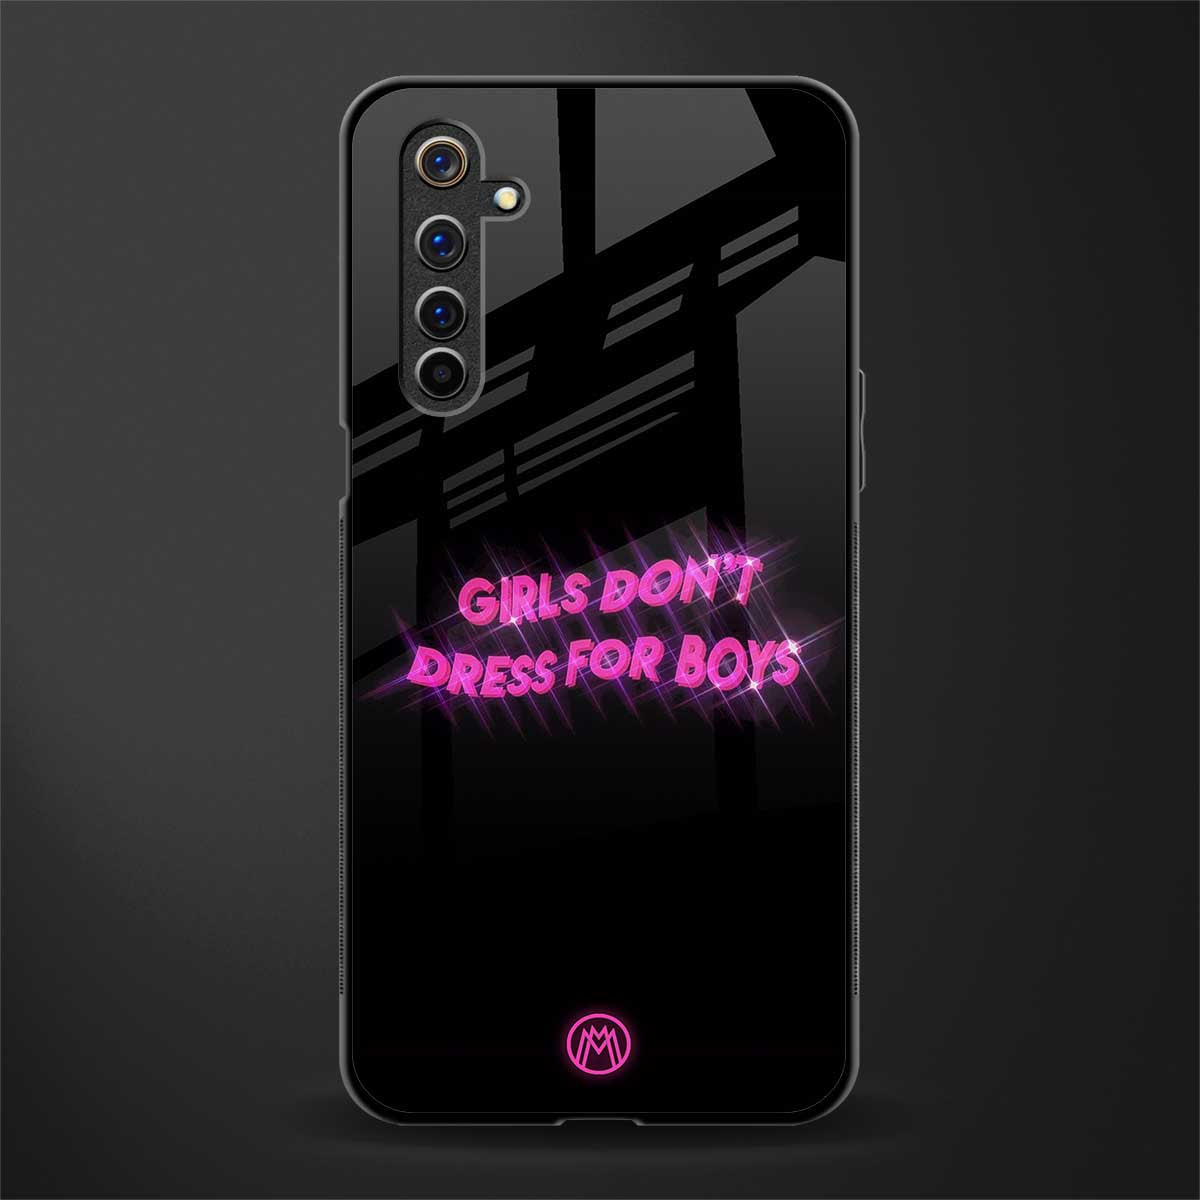 girls don't dress for boys glass case for realme 6 pro image